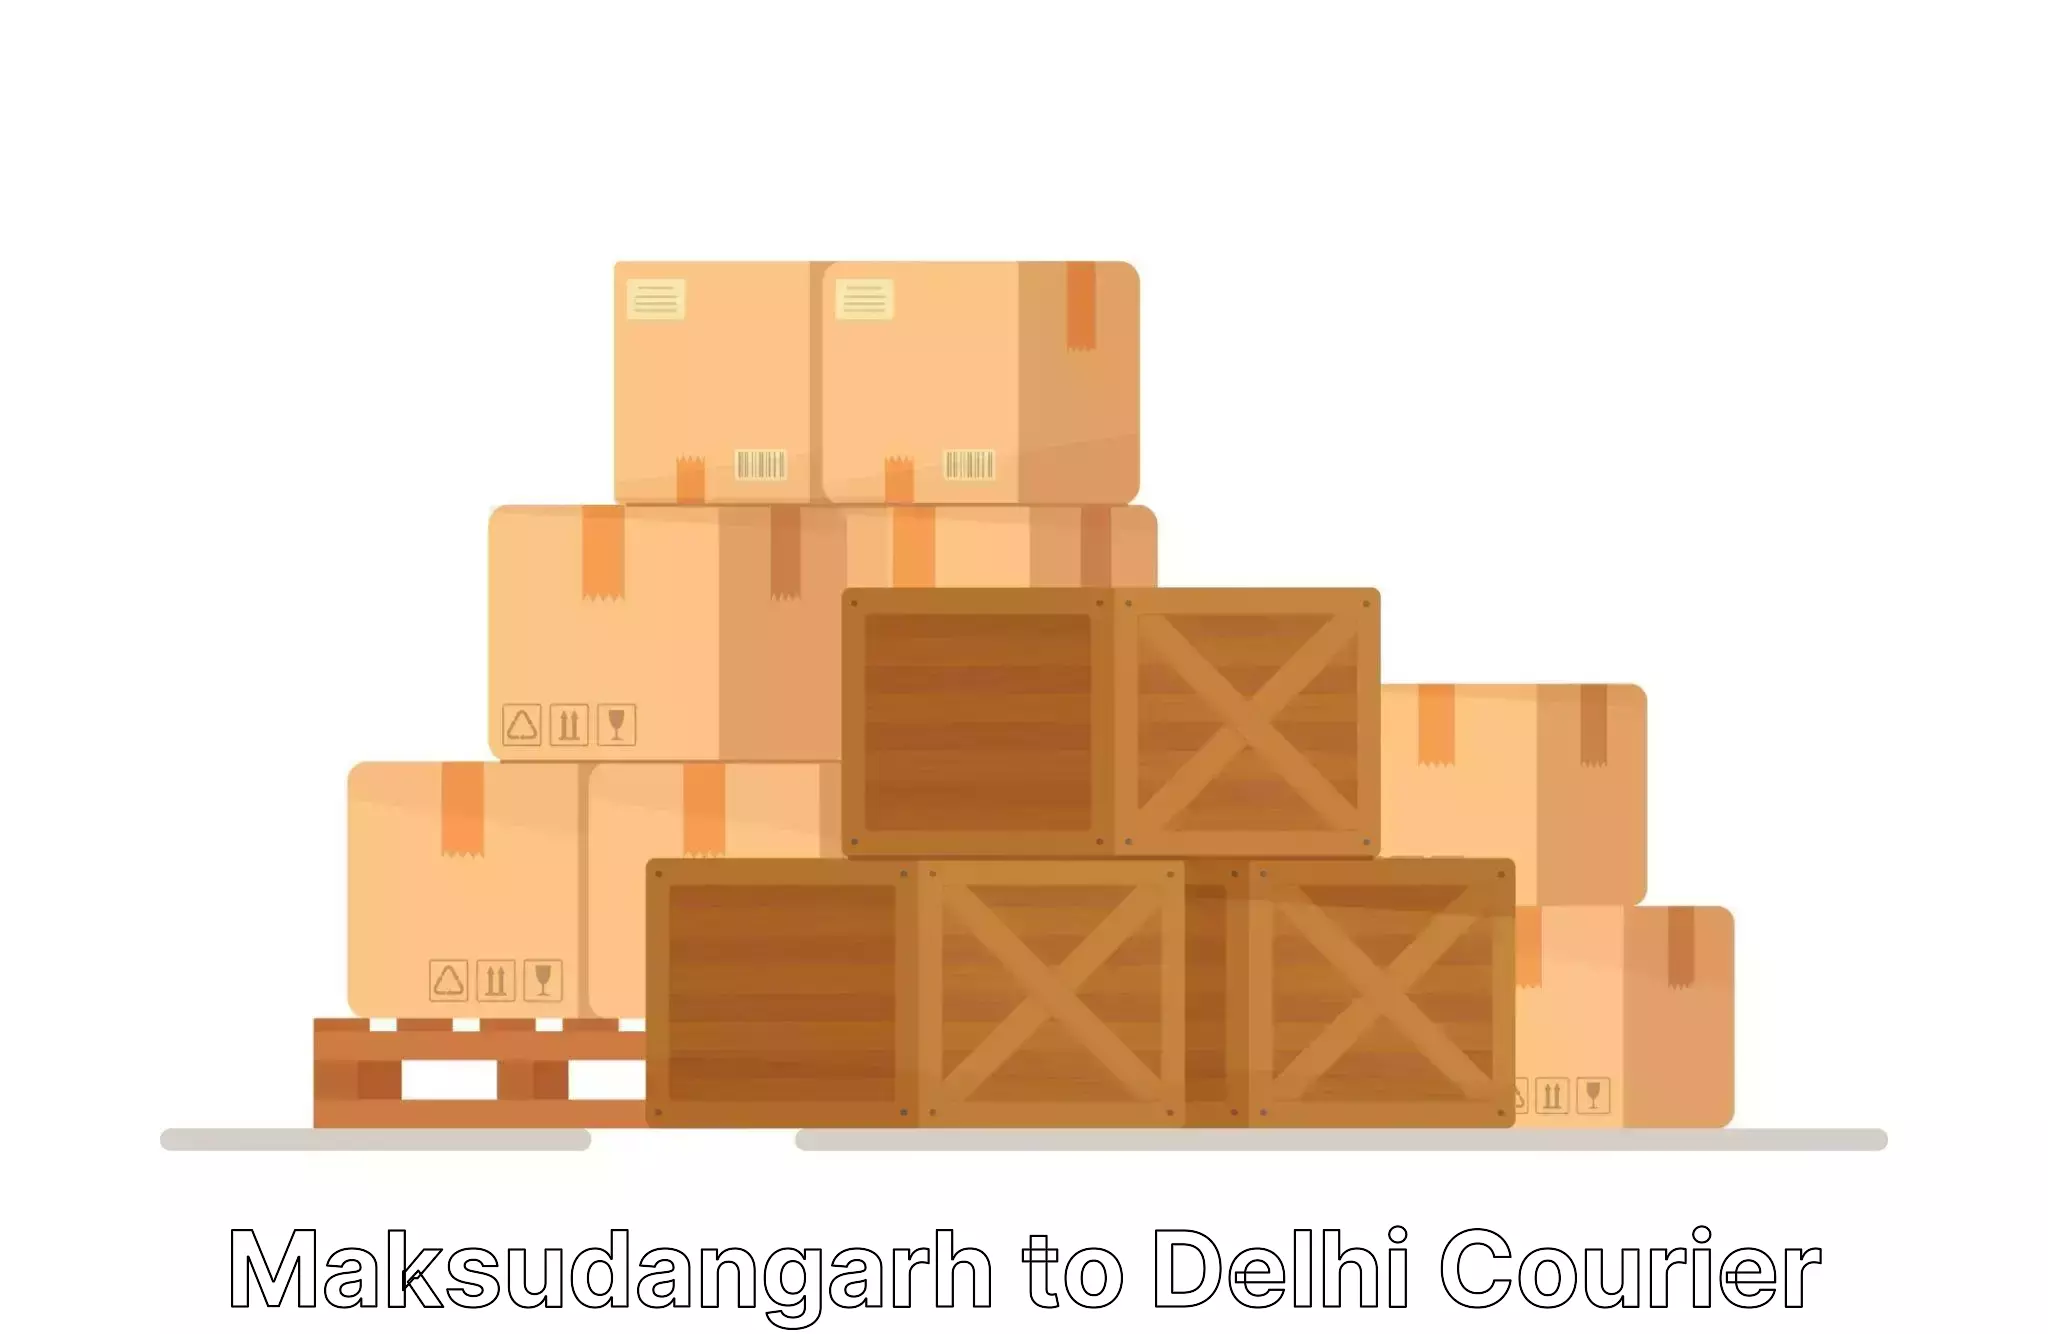 Efficient relocation services Maksudangarh to Lodhi Road